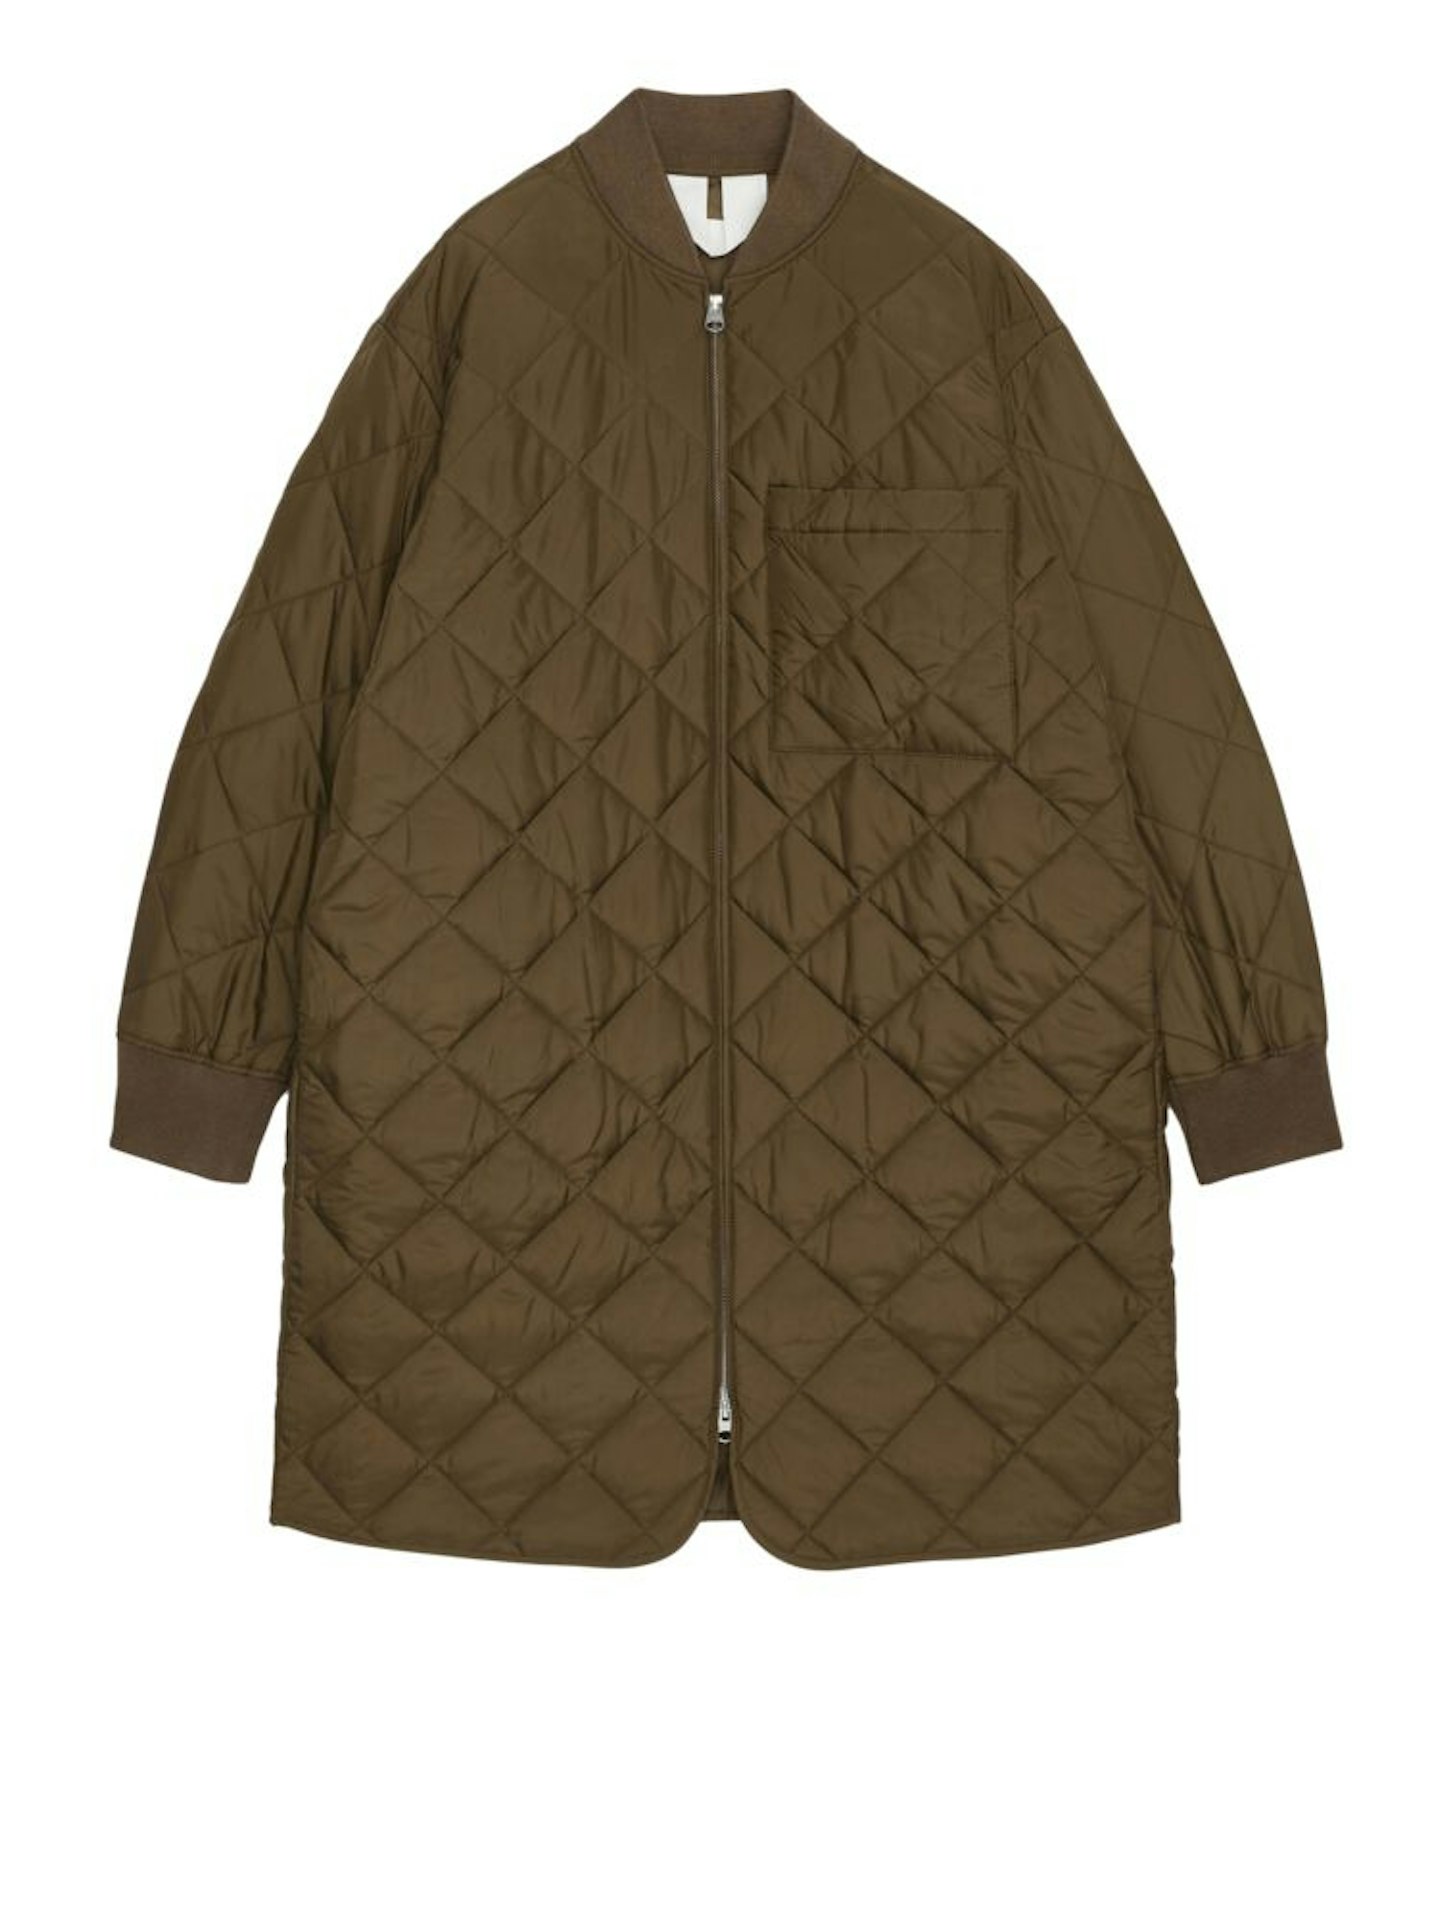 Arket, Quilted Long Jacket, £99